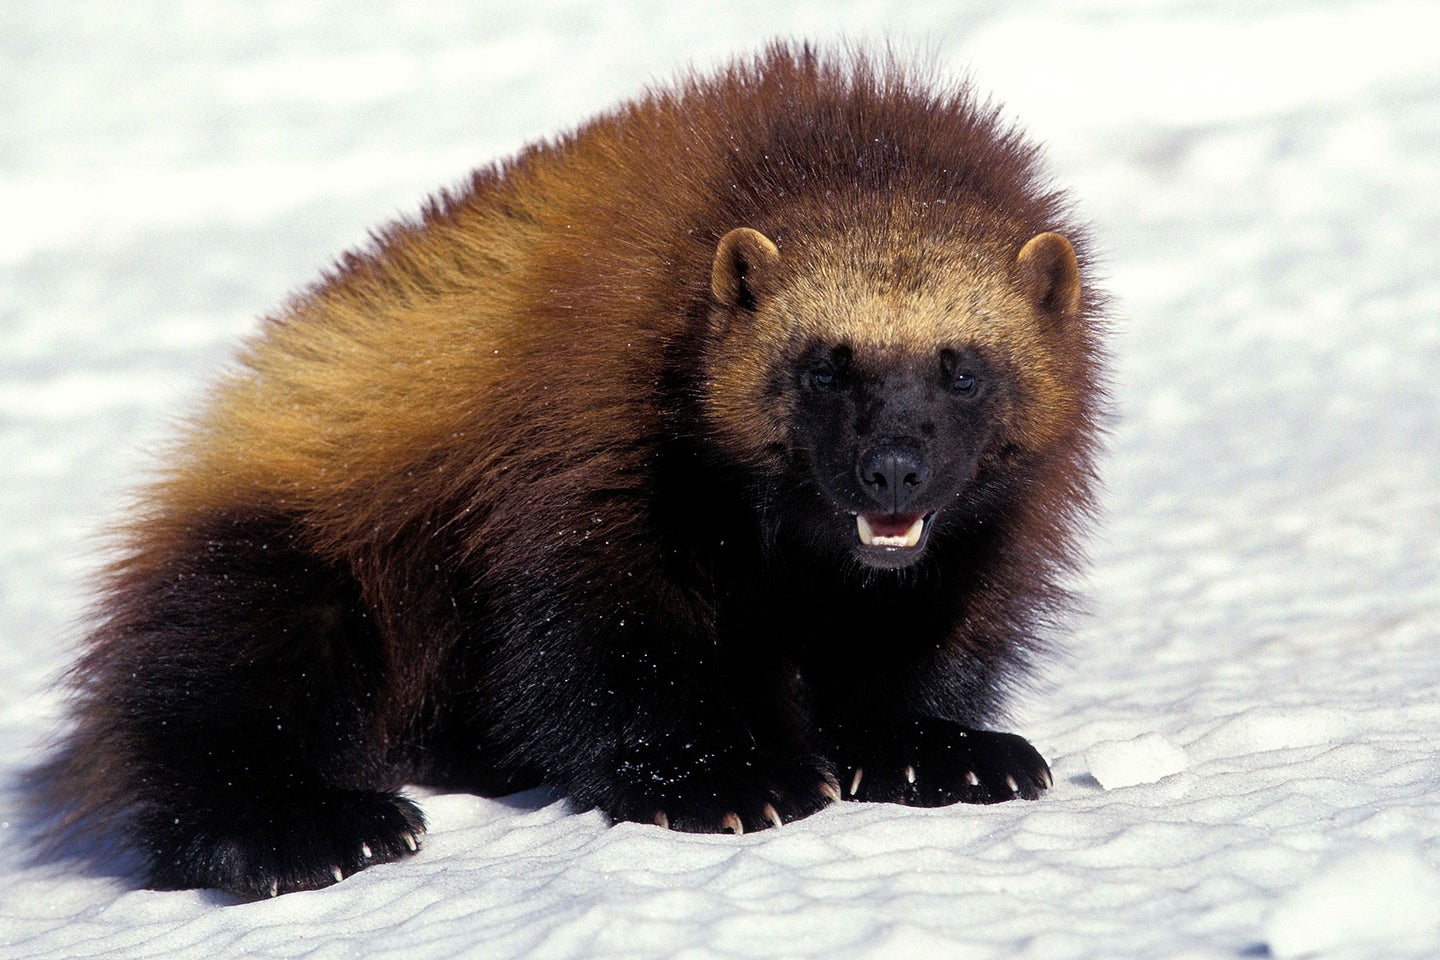 A wolverine in the snow.